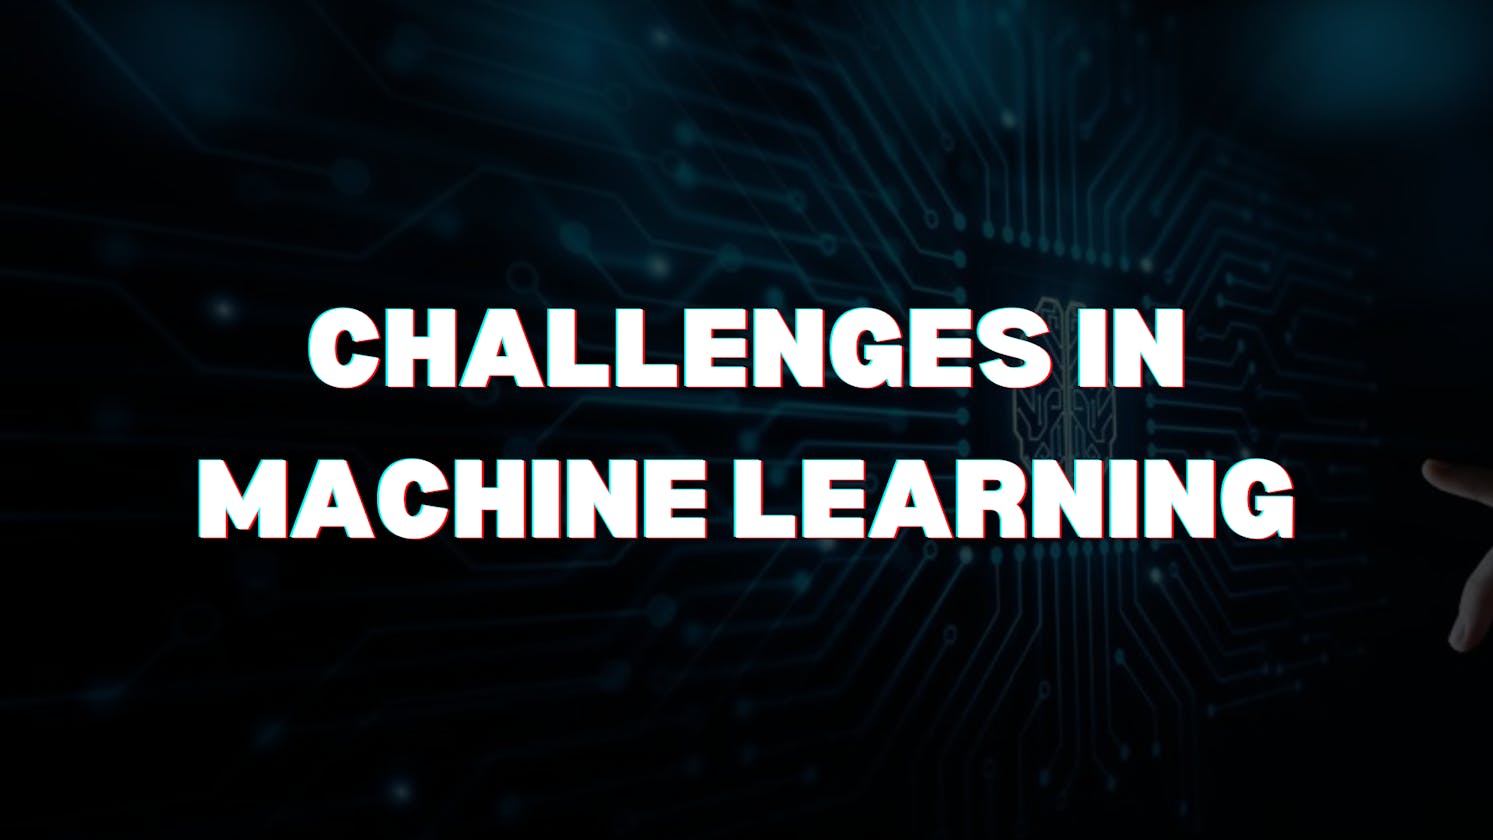 Challenges in Machine Learning